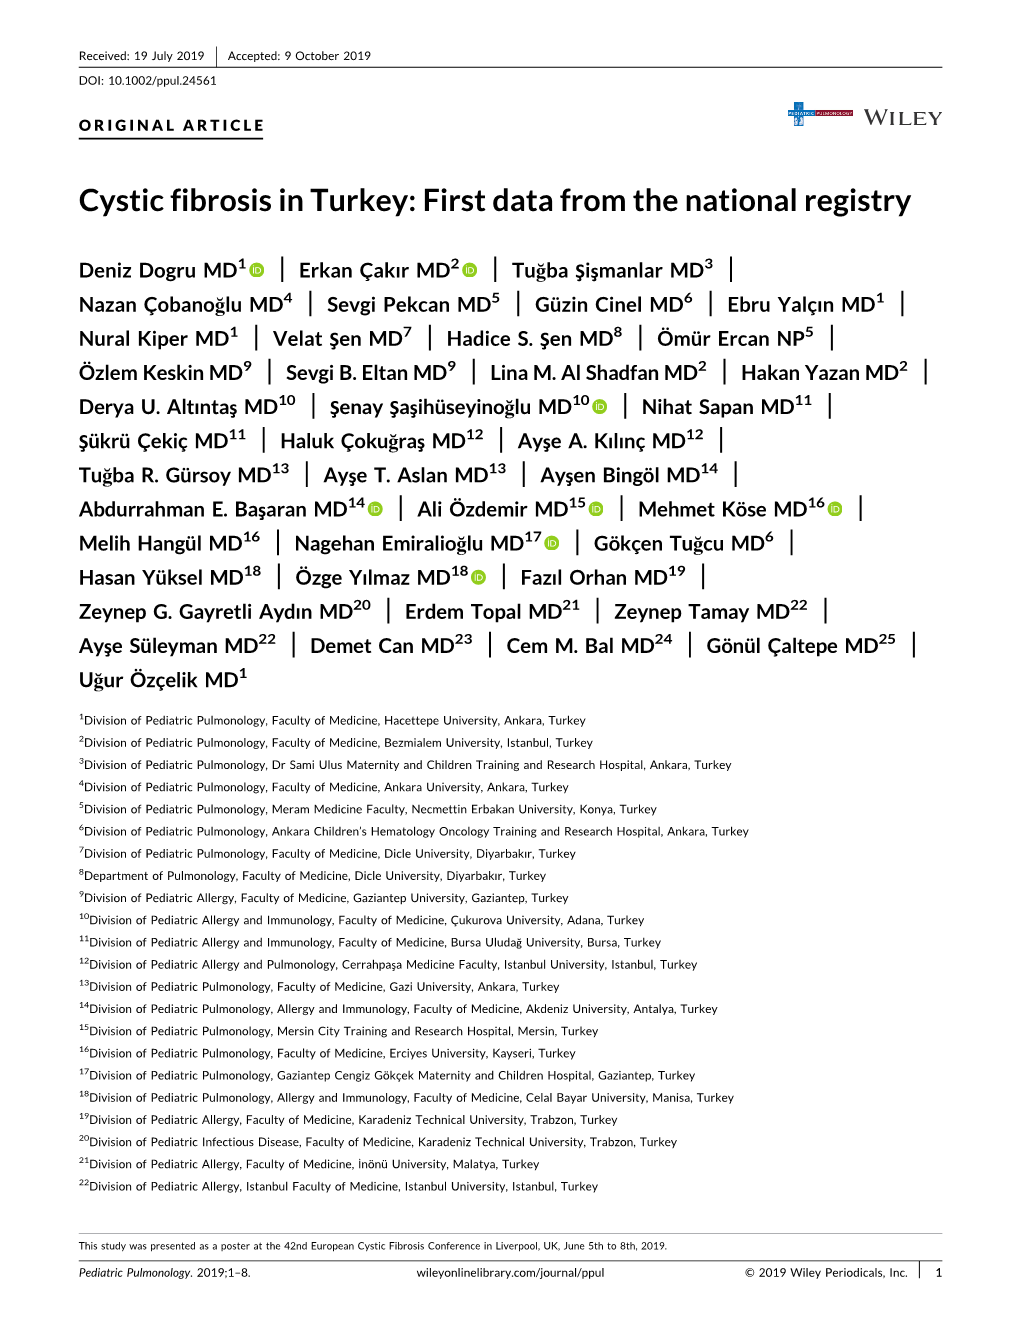 Cystic Fibrosis in Turkey: First Data from the National Registry